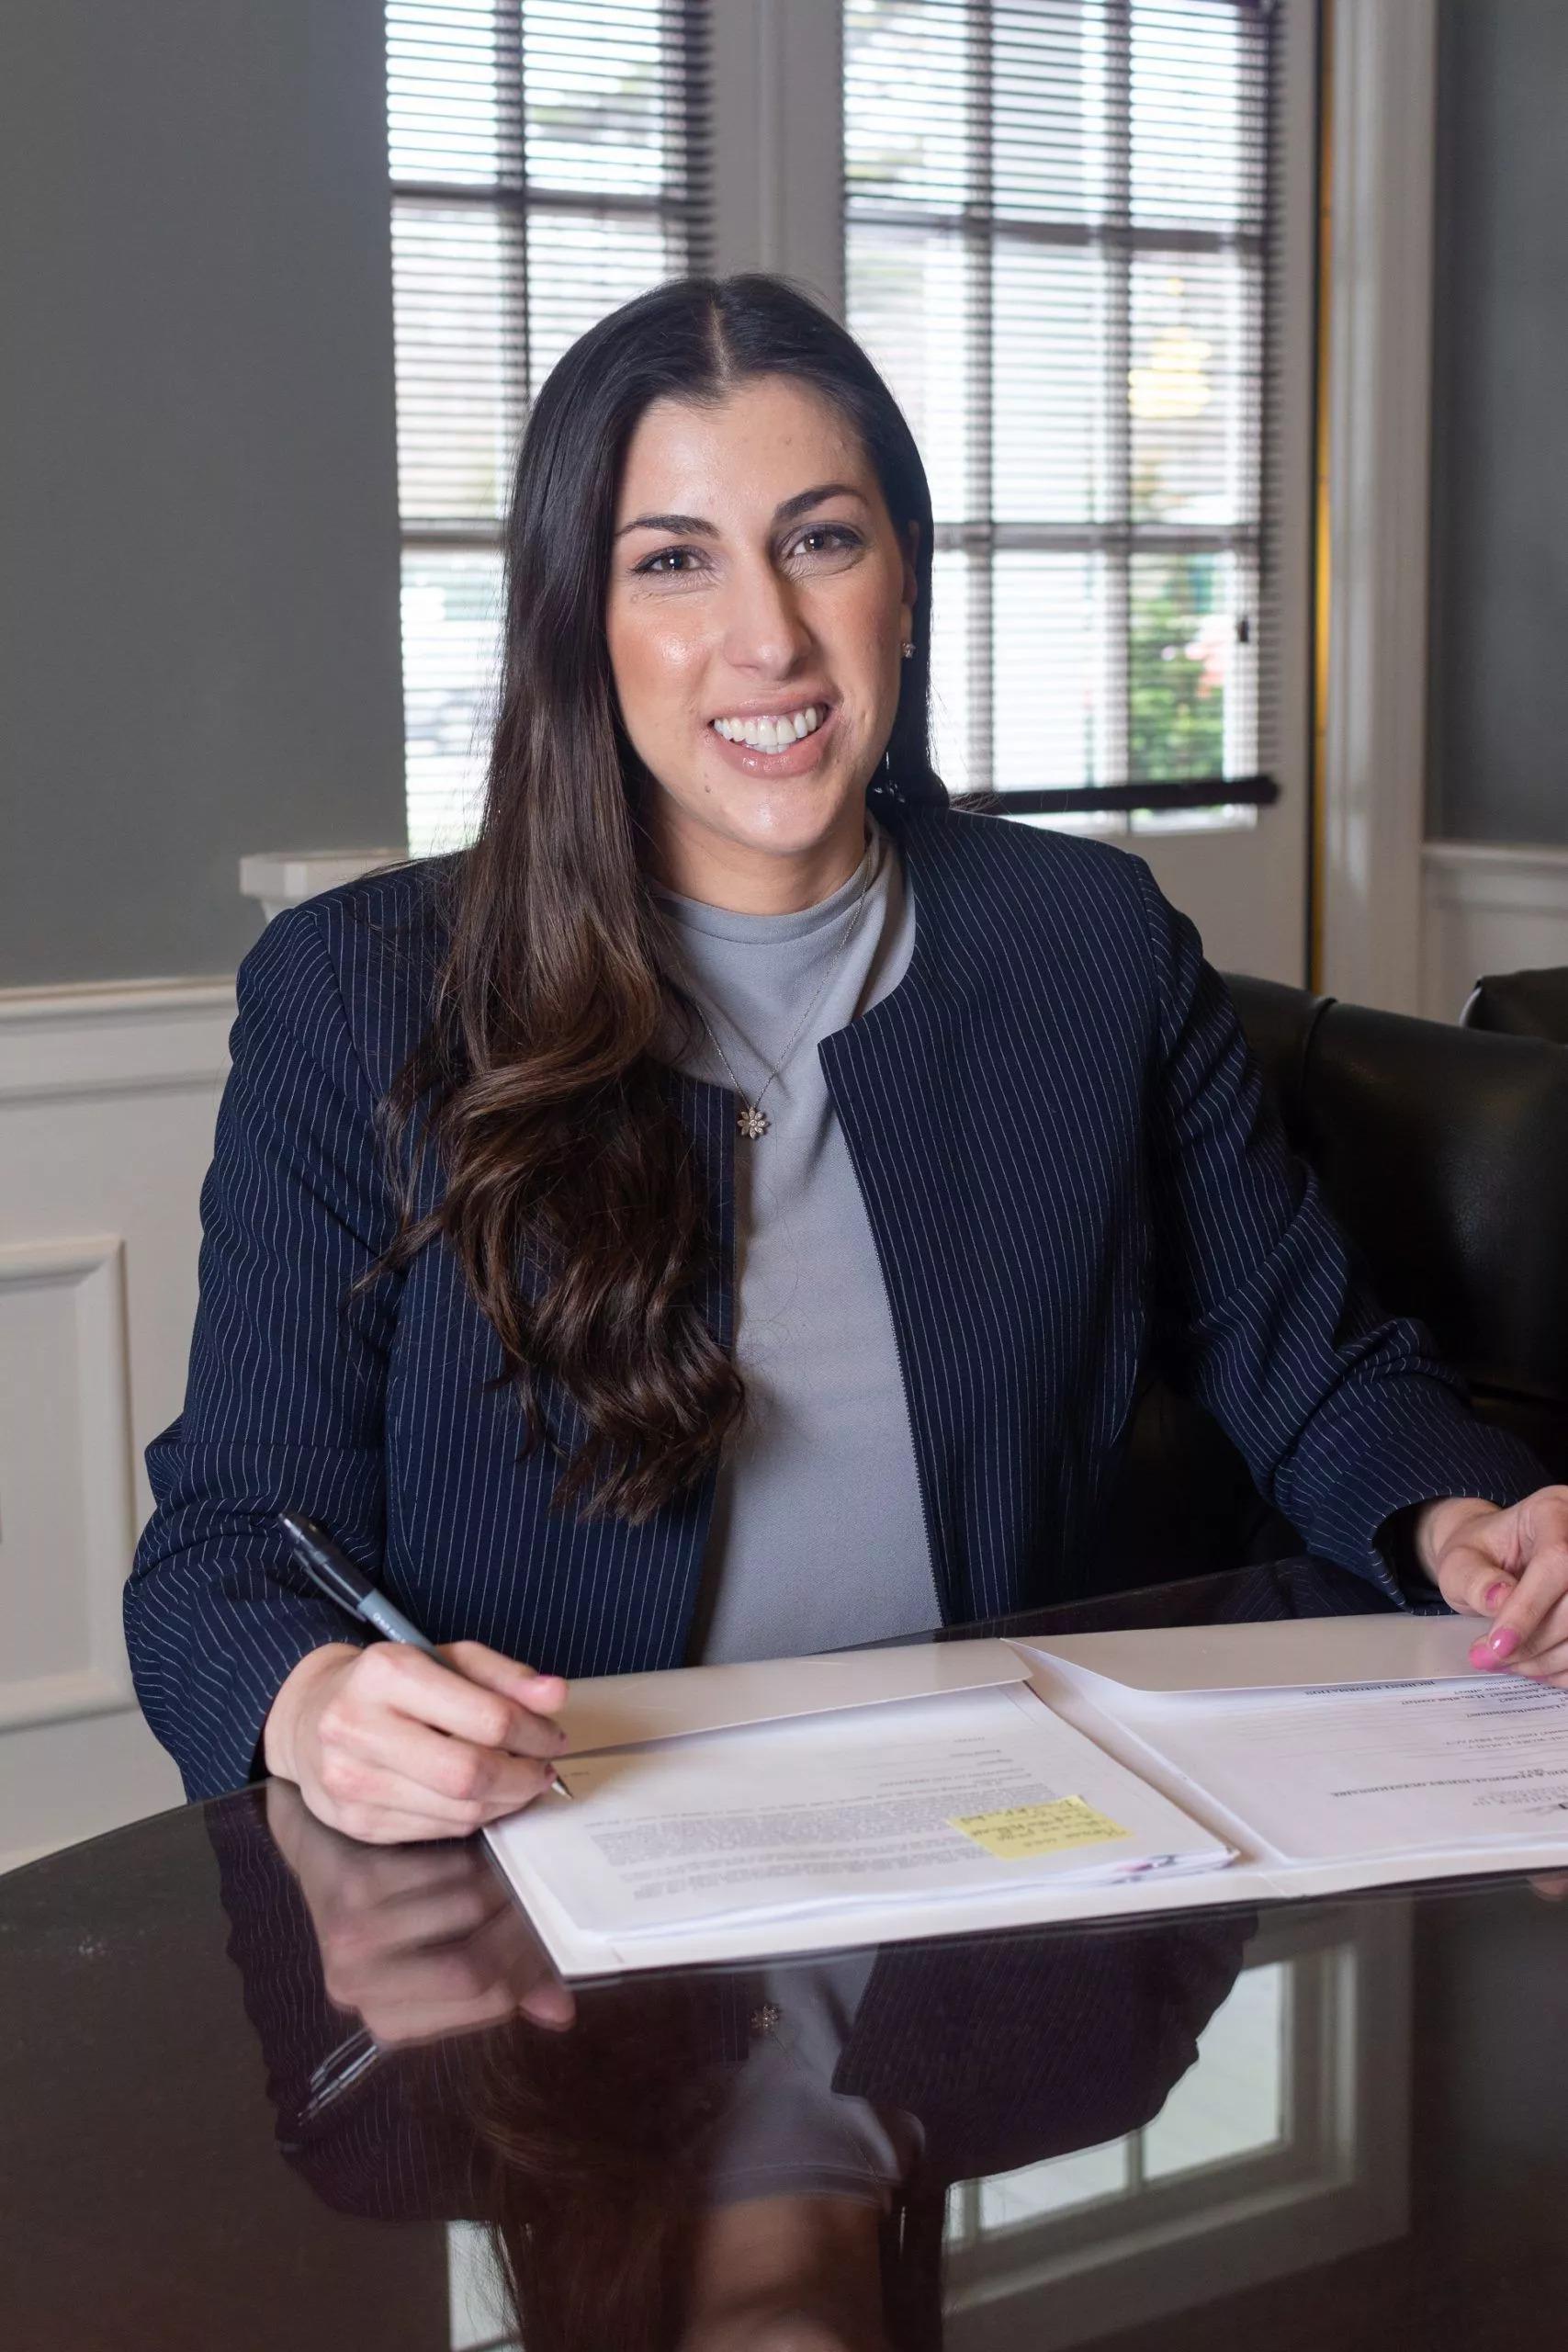 Lindsay Marion Langella started her legal career in the Suffolk County District Attorney's Office as an Assistant District Attorney representing the people of Suffolk County. As an Assistant District Attorney, Ms. Langella prosecuted cases including sex abuse, domestic violence, driving while intoxicated, assaults, and other offenses.